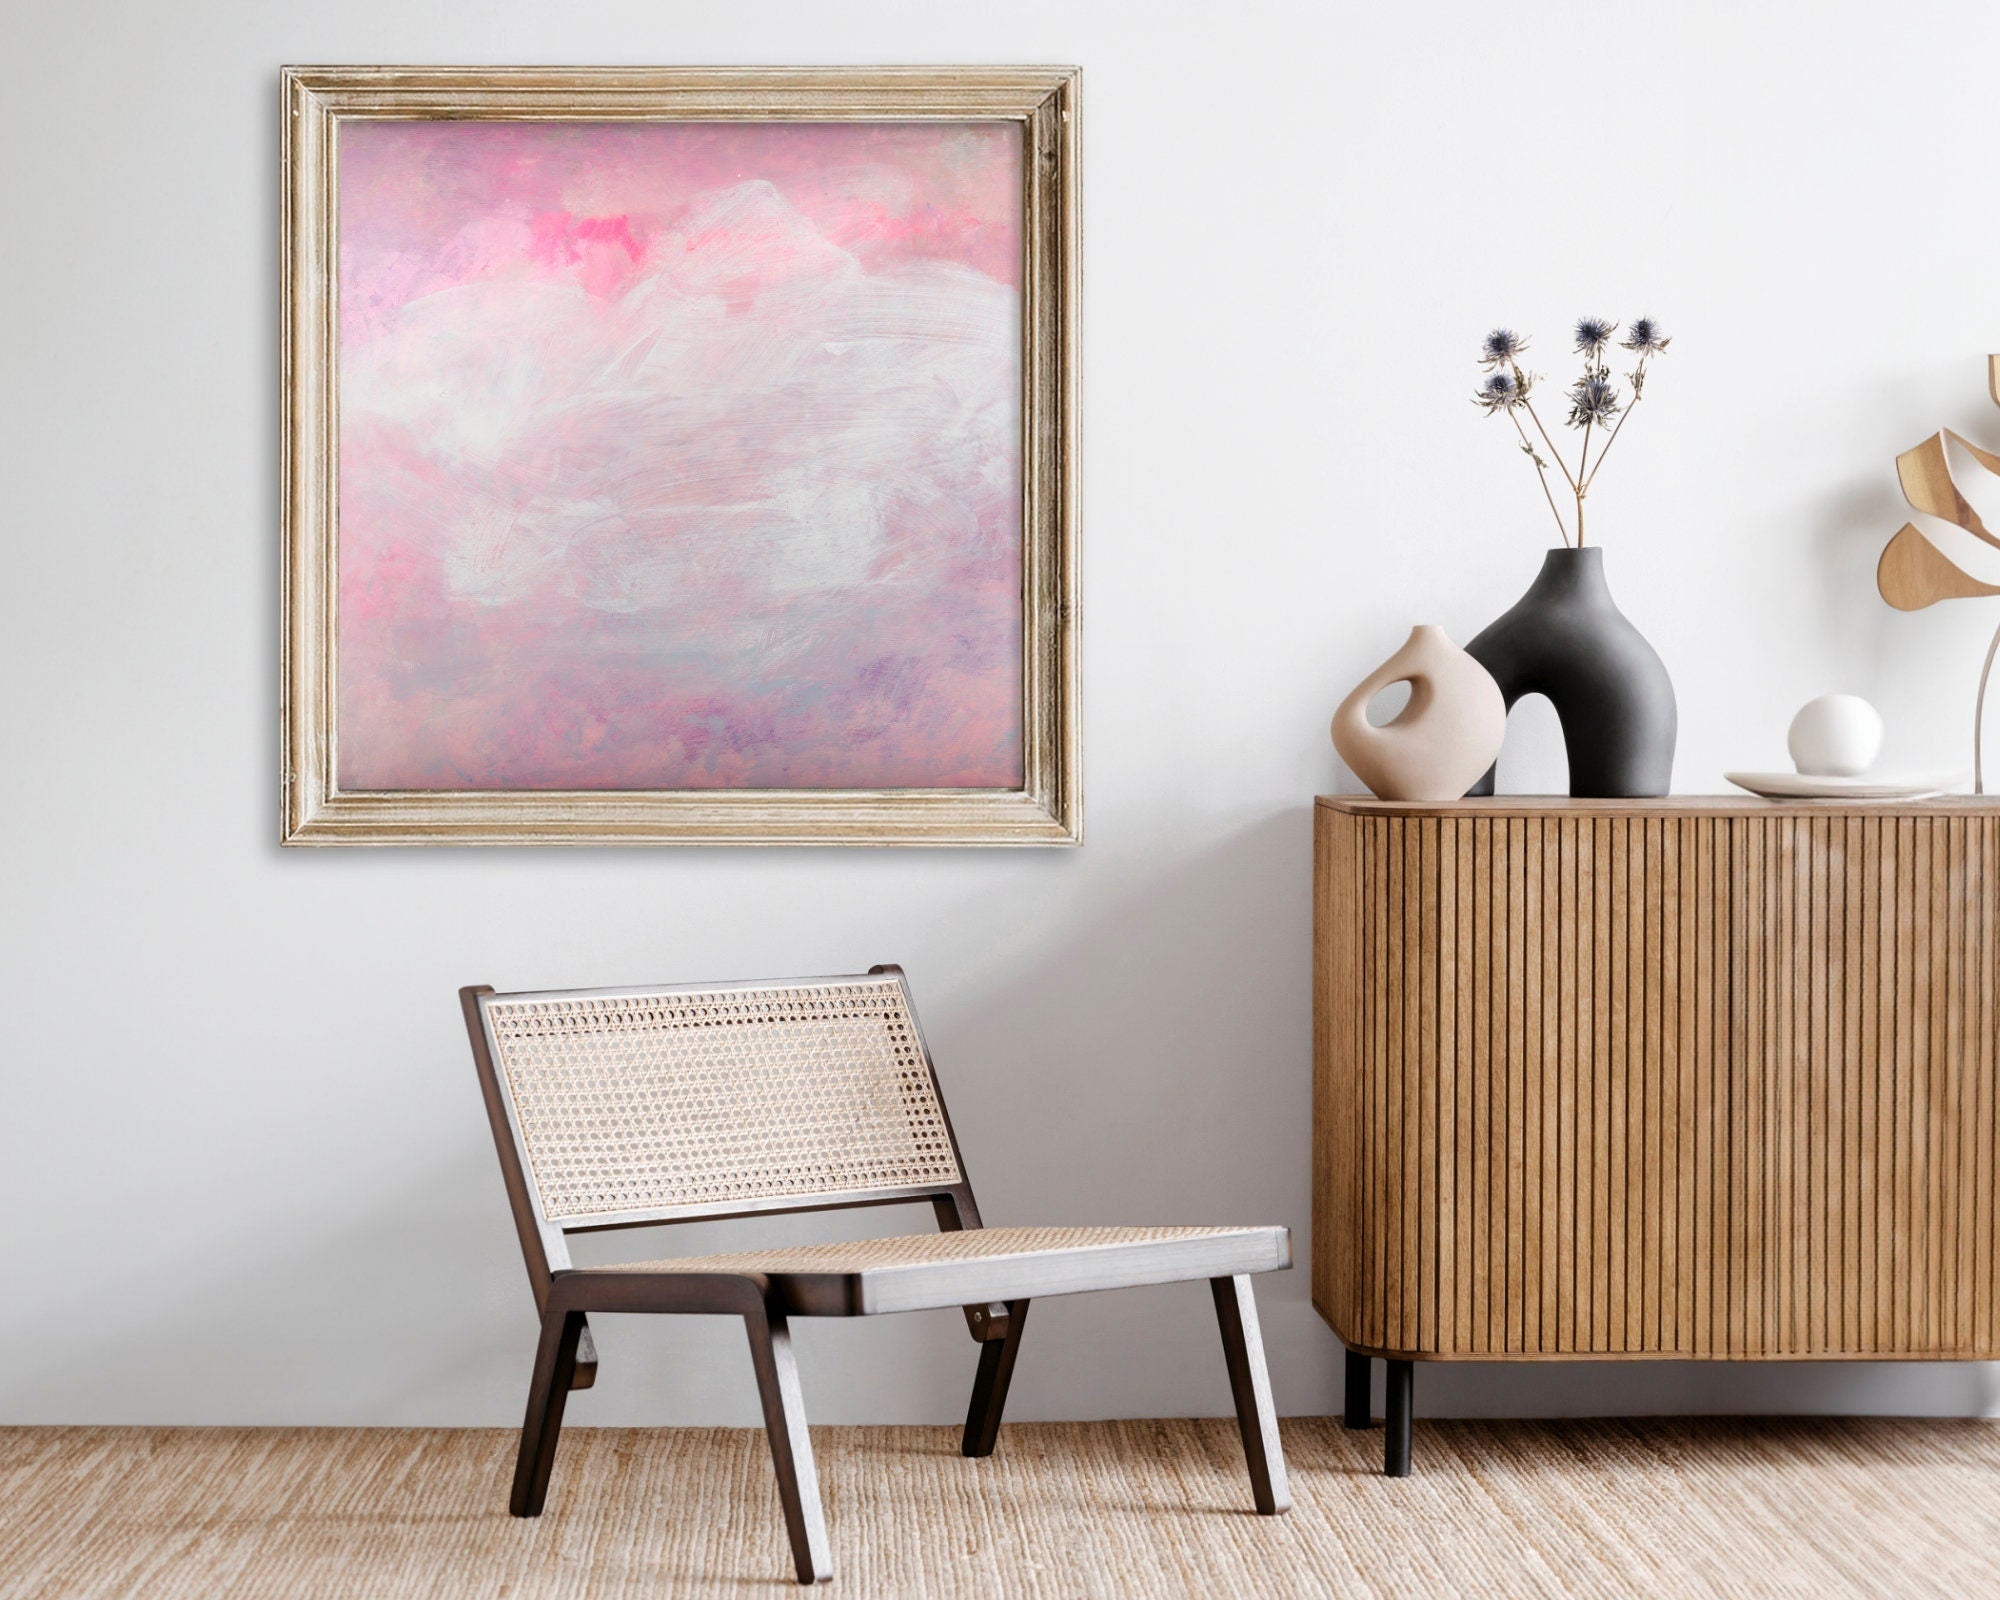 Entry room with a Large original Blush pink Abstract Painting by Camilo Mattis